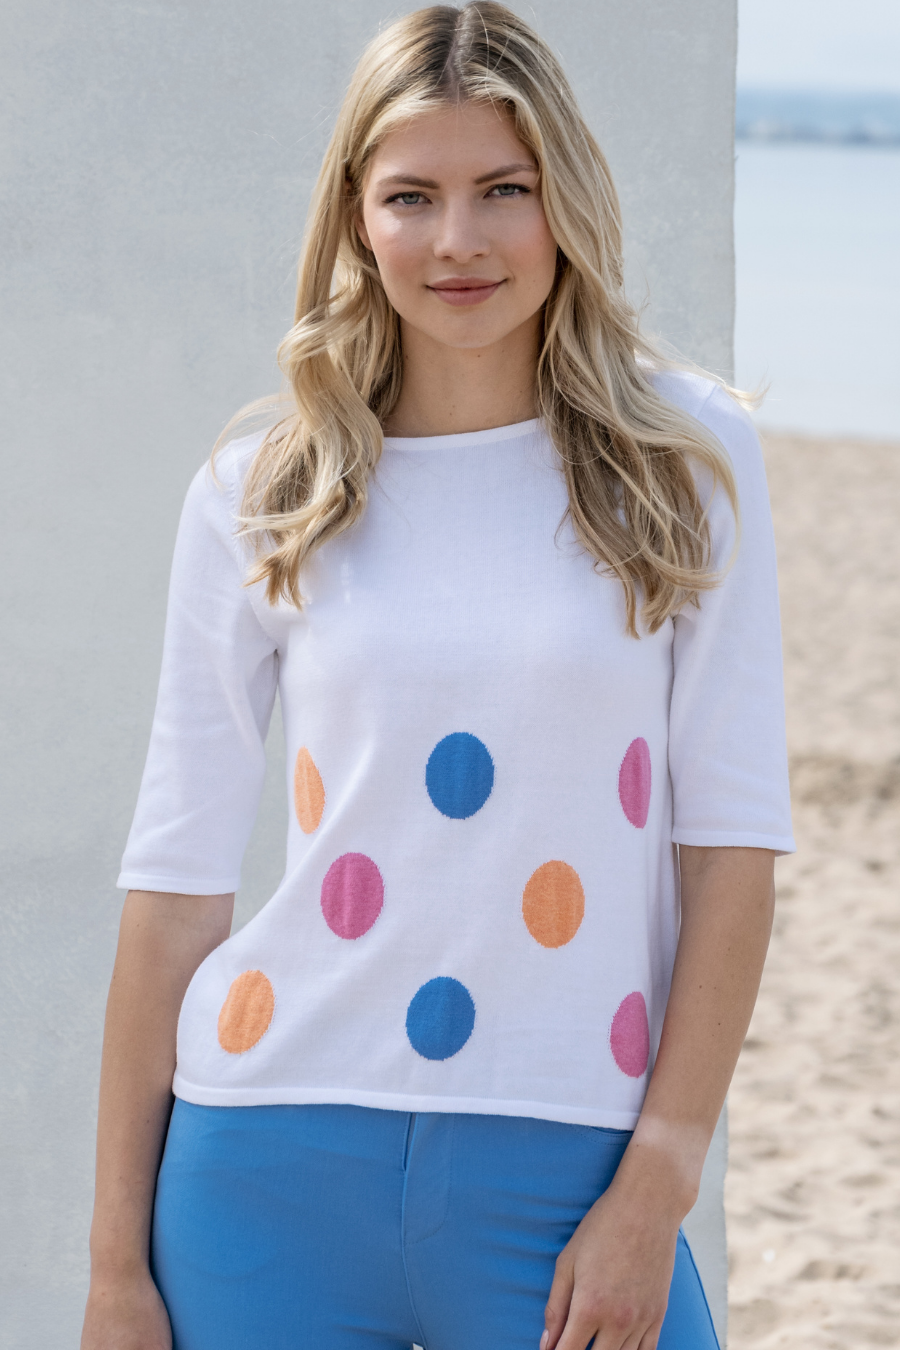 Dot Cotton Sweater ONLINE ONLY